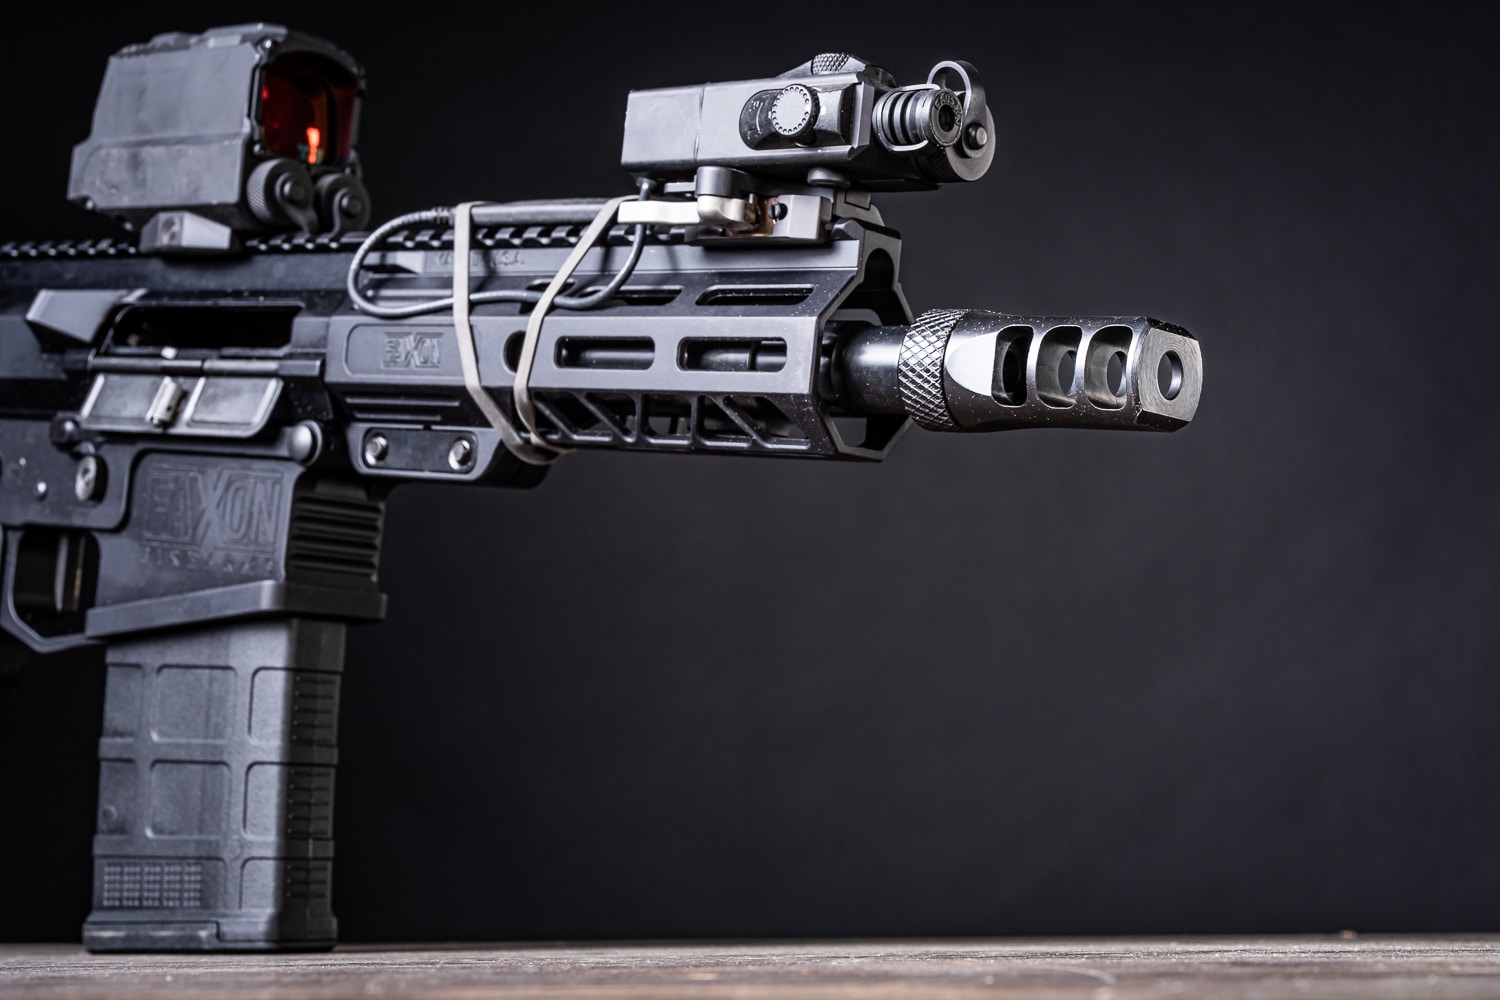 Faxon Firearms Sentinel AR10 Chambered in 8.6 Blackout